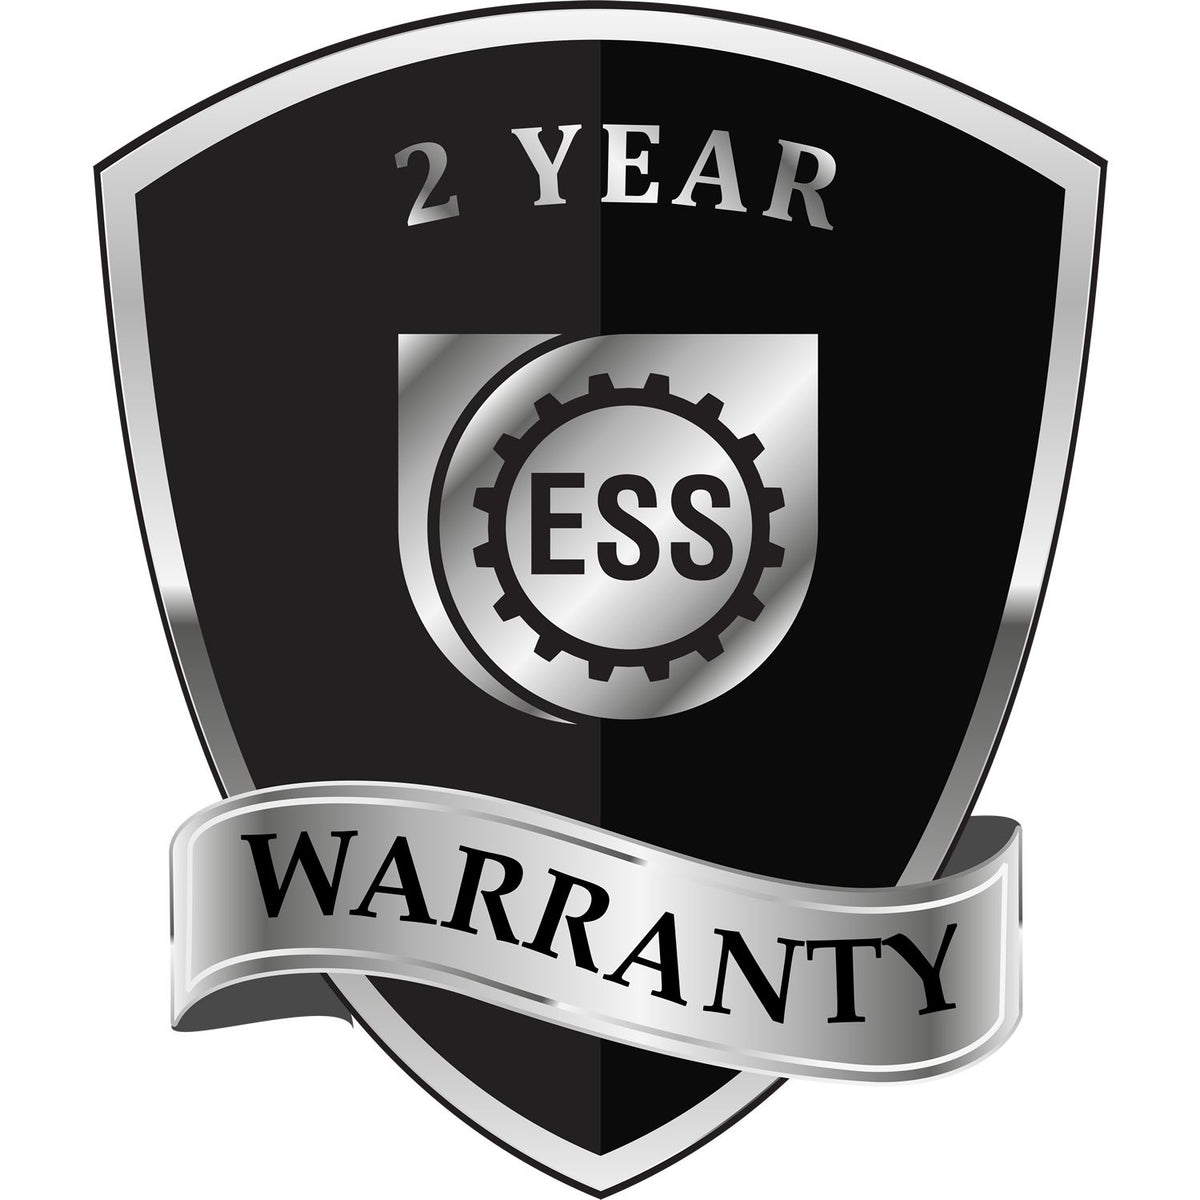 A black and silver badge or emblem showing warranty information for the Hybrid New Jersey Geologist Seal